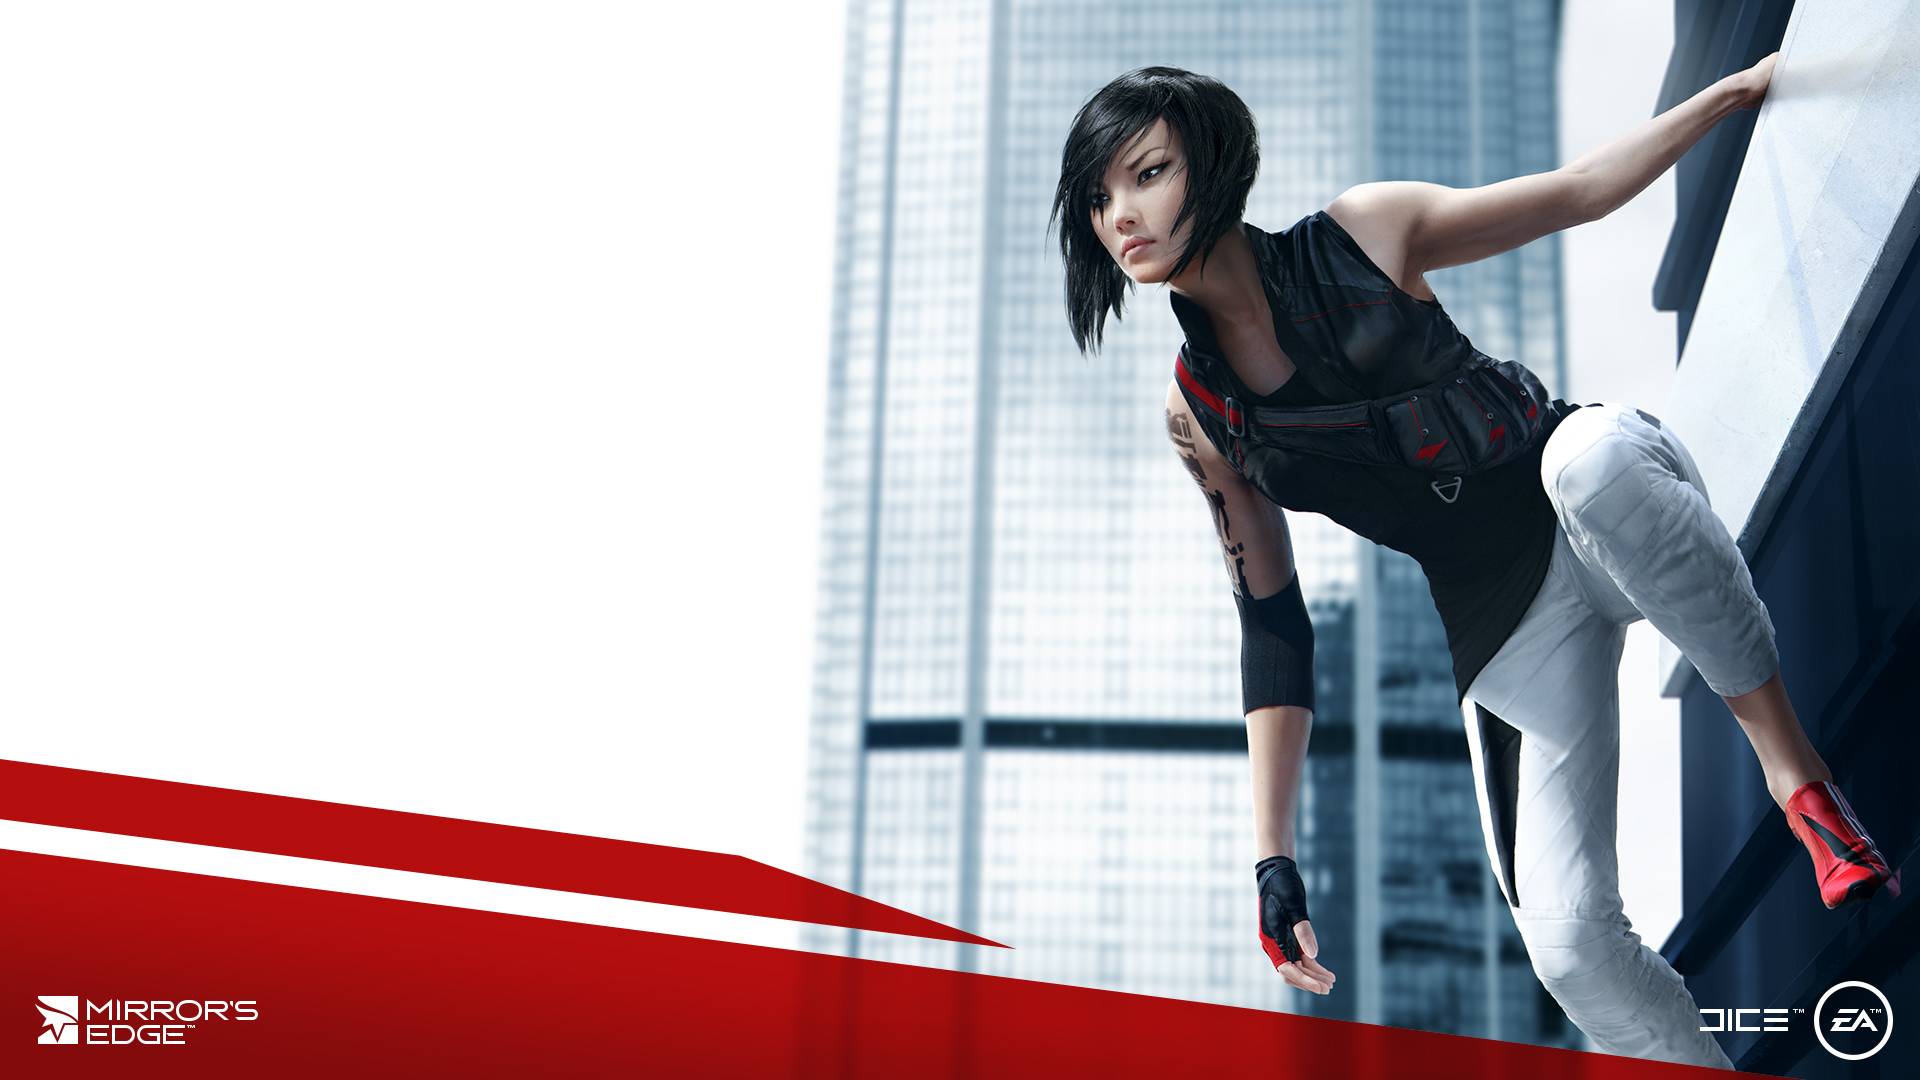 Fans of the cult DICE developed parkour title Mirror's Edge celebrated today as EA officially confirmed its sequel will be released in early 2016.